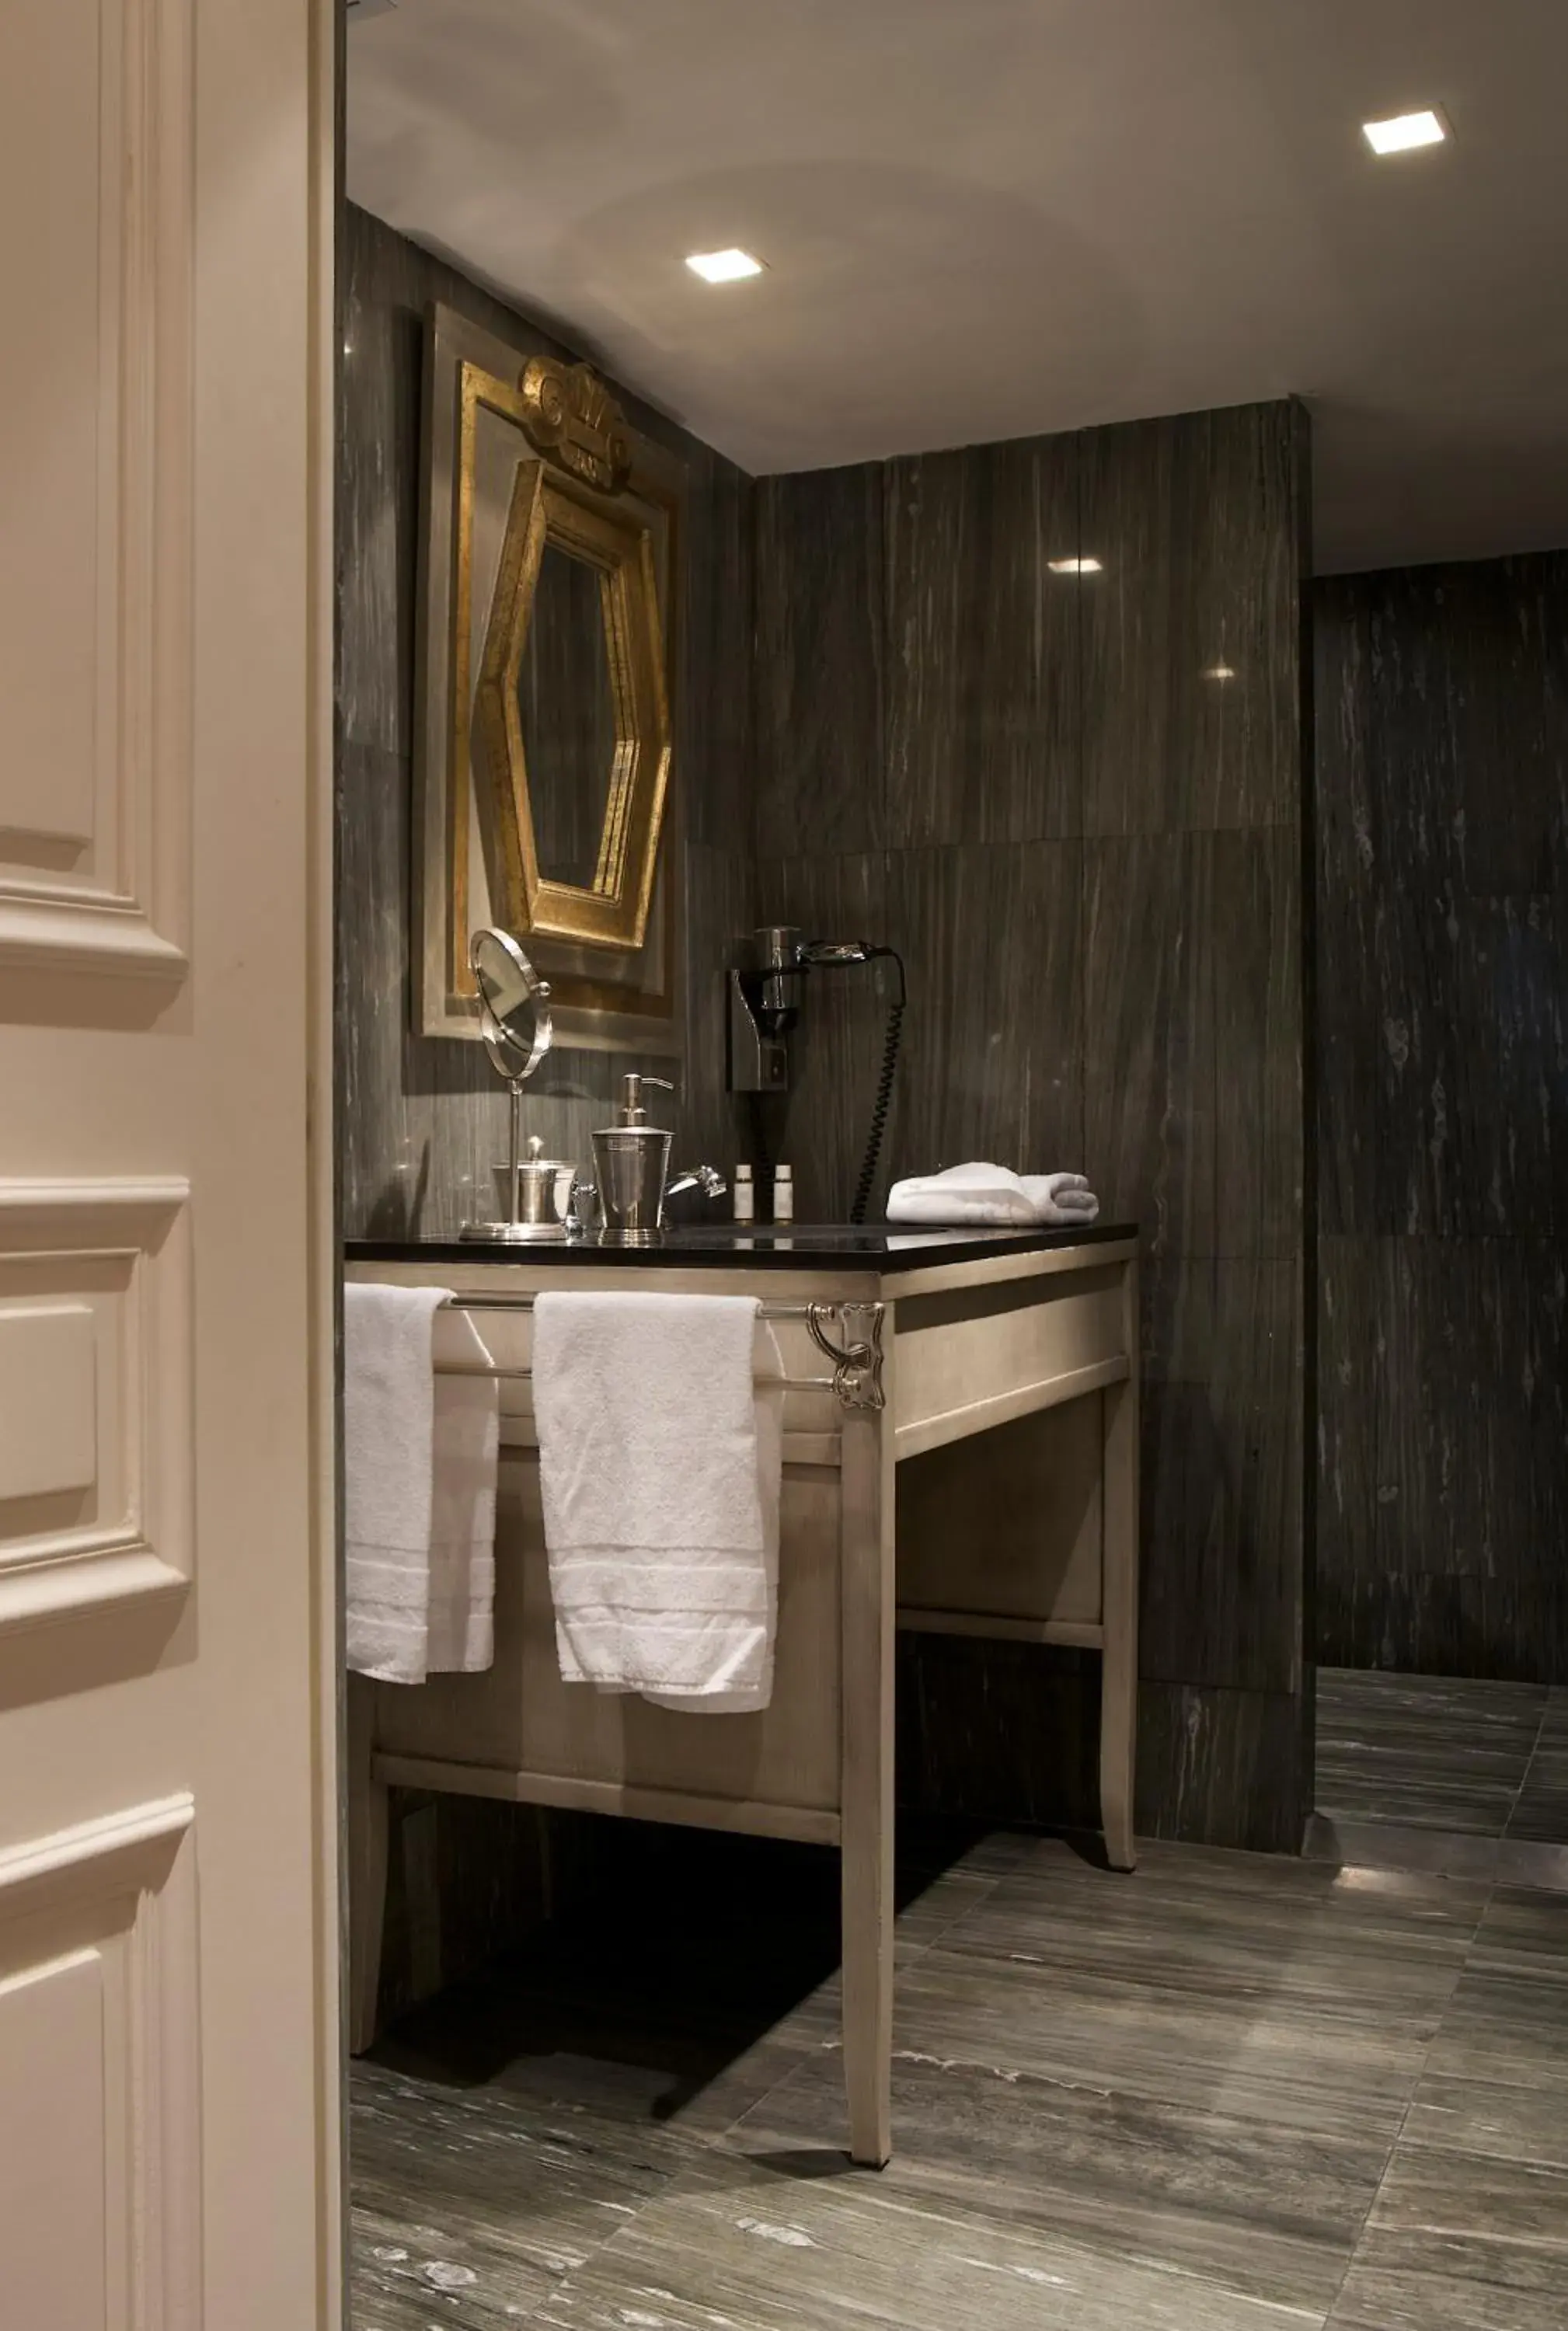 Bathroom in Chateaubriand Hotel